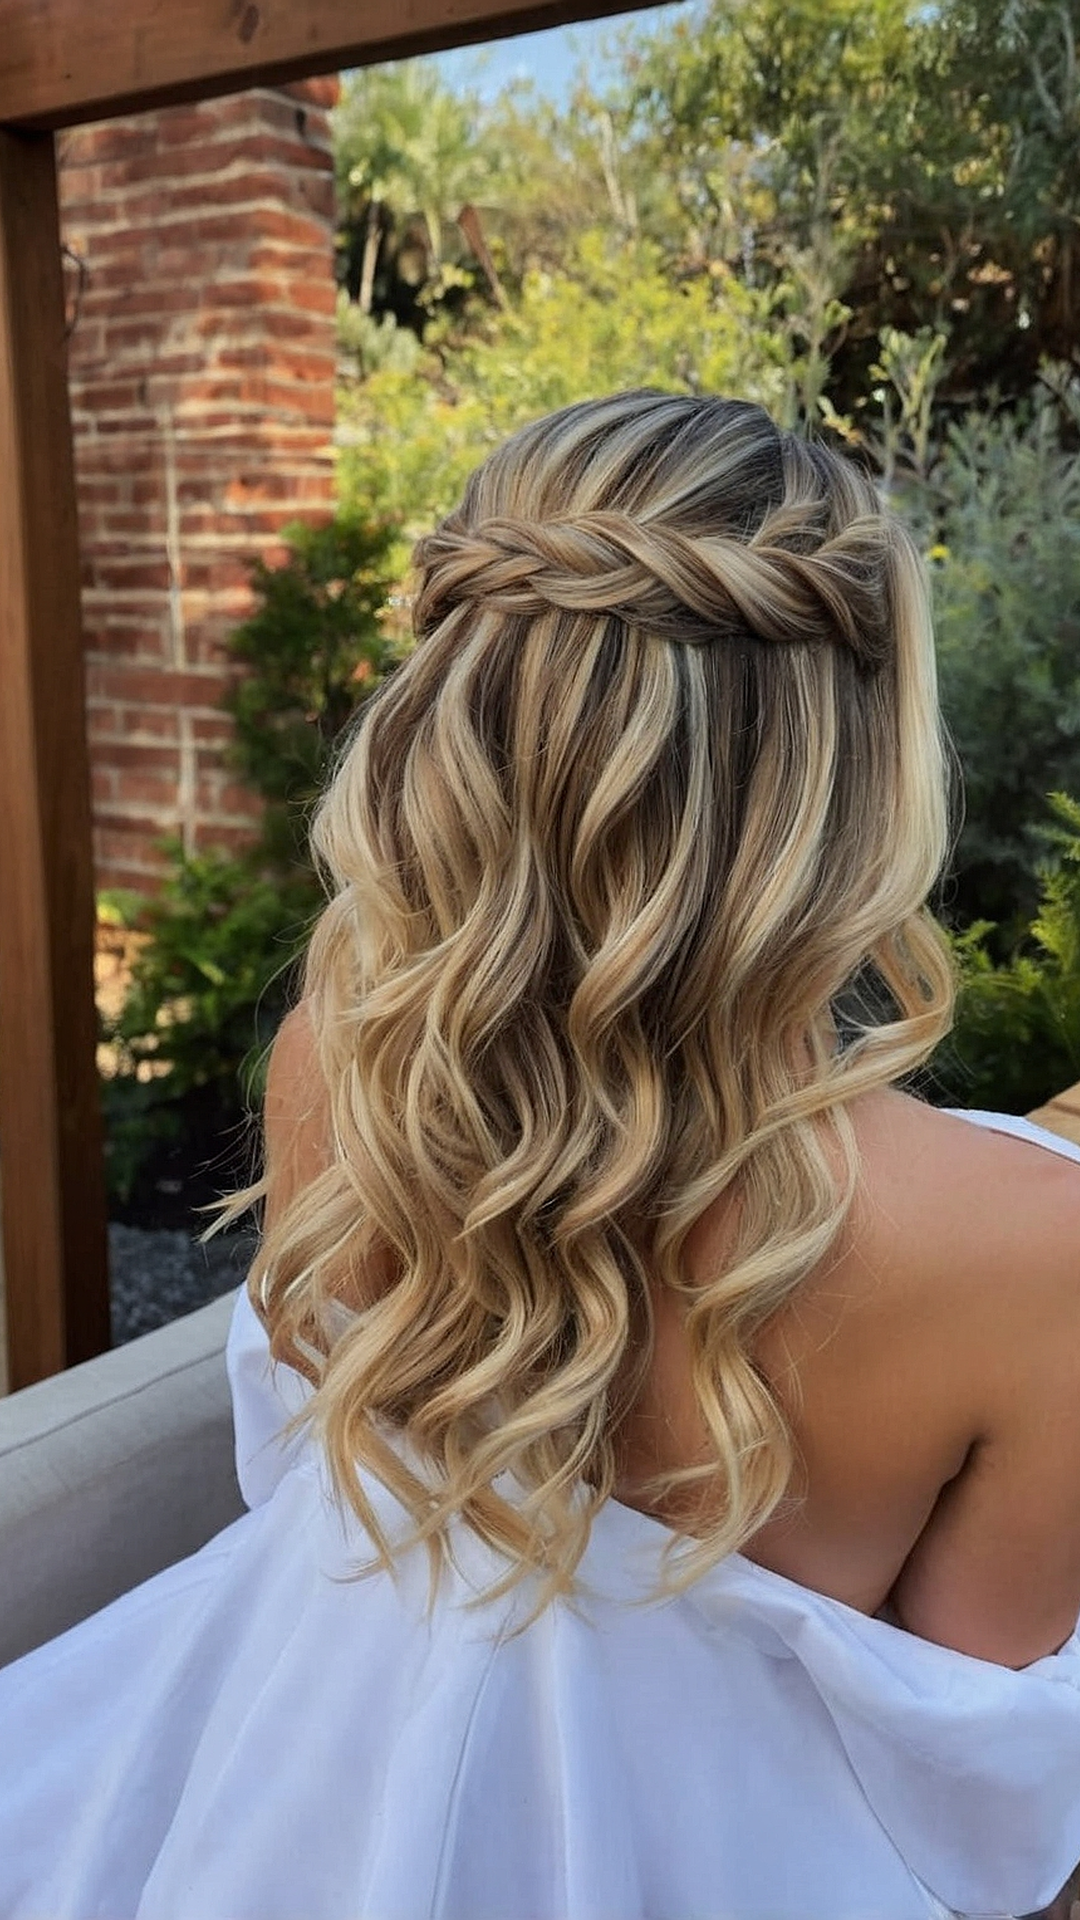 Dreamy Half Up Half Down Prom Hairstyle Inspirations